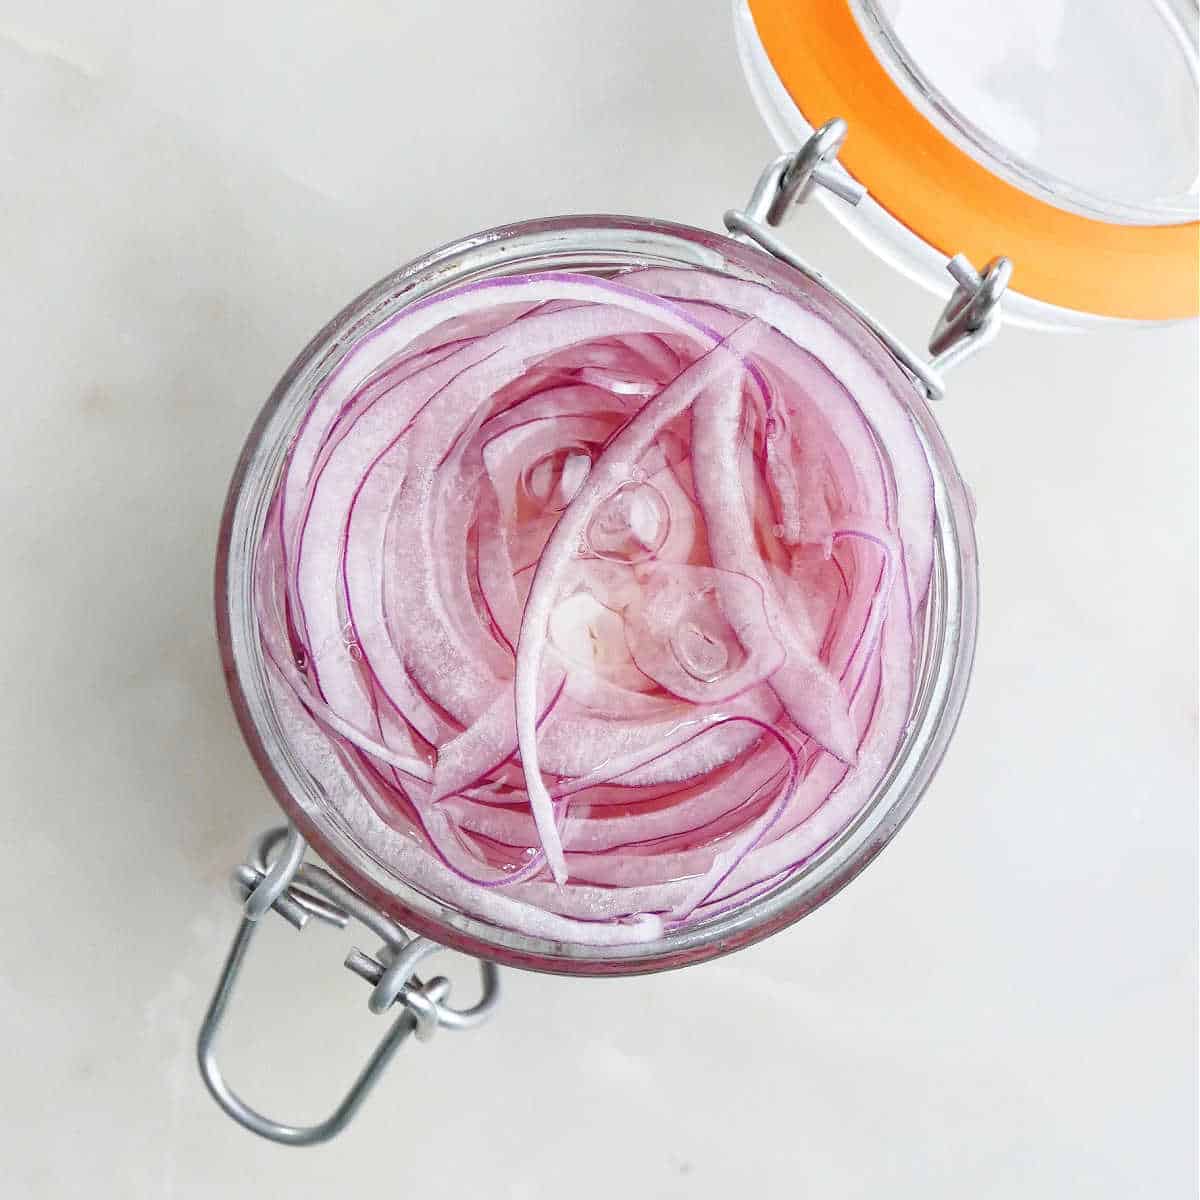 thinly sliced red onion in a jar before being covered in vinegar brine